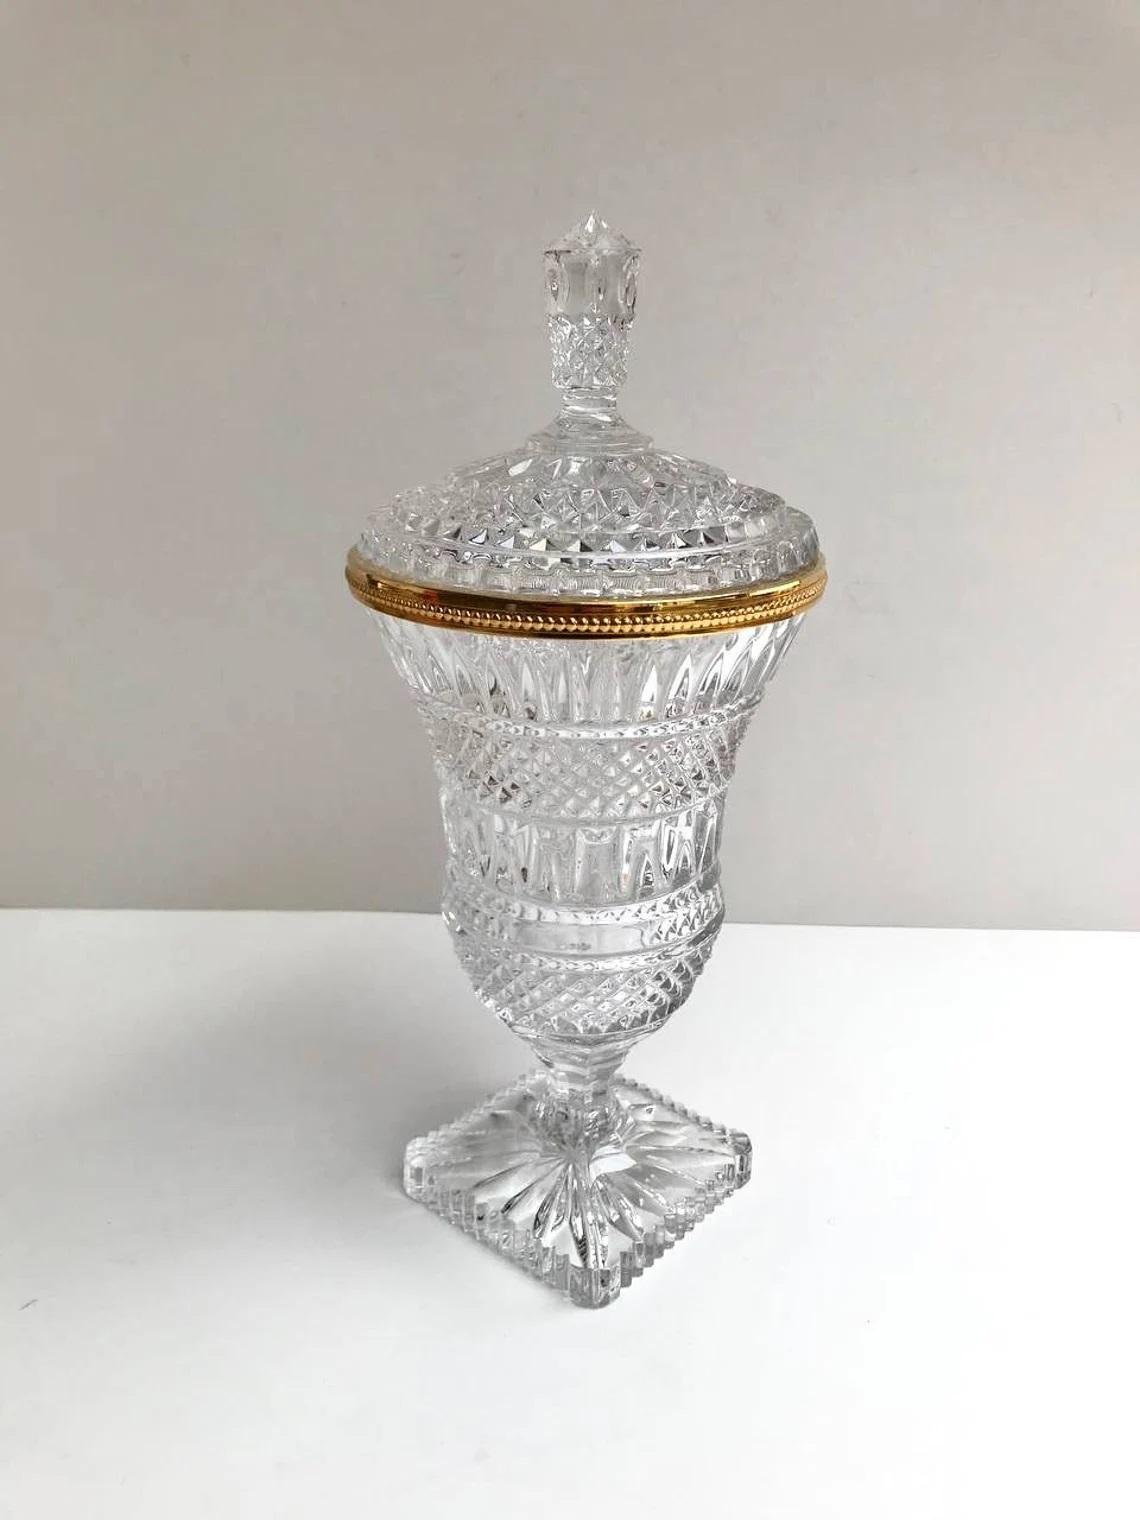 Vintage Large Crystal Vase with Lid.

Crystal of the highest quality.

Hand cut.

France.

1970’s

In excellent condition, no chips, cracks or crazing.

Size:

Height - 12.8 inc 32.5 cm
Diameter - 5.7 inc 14.5 cm.